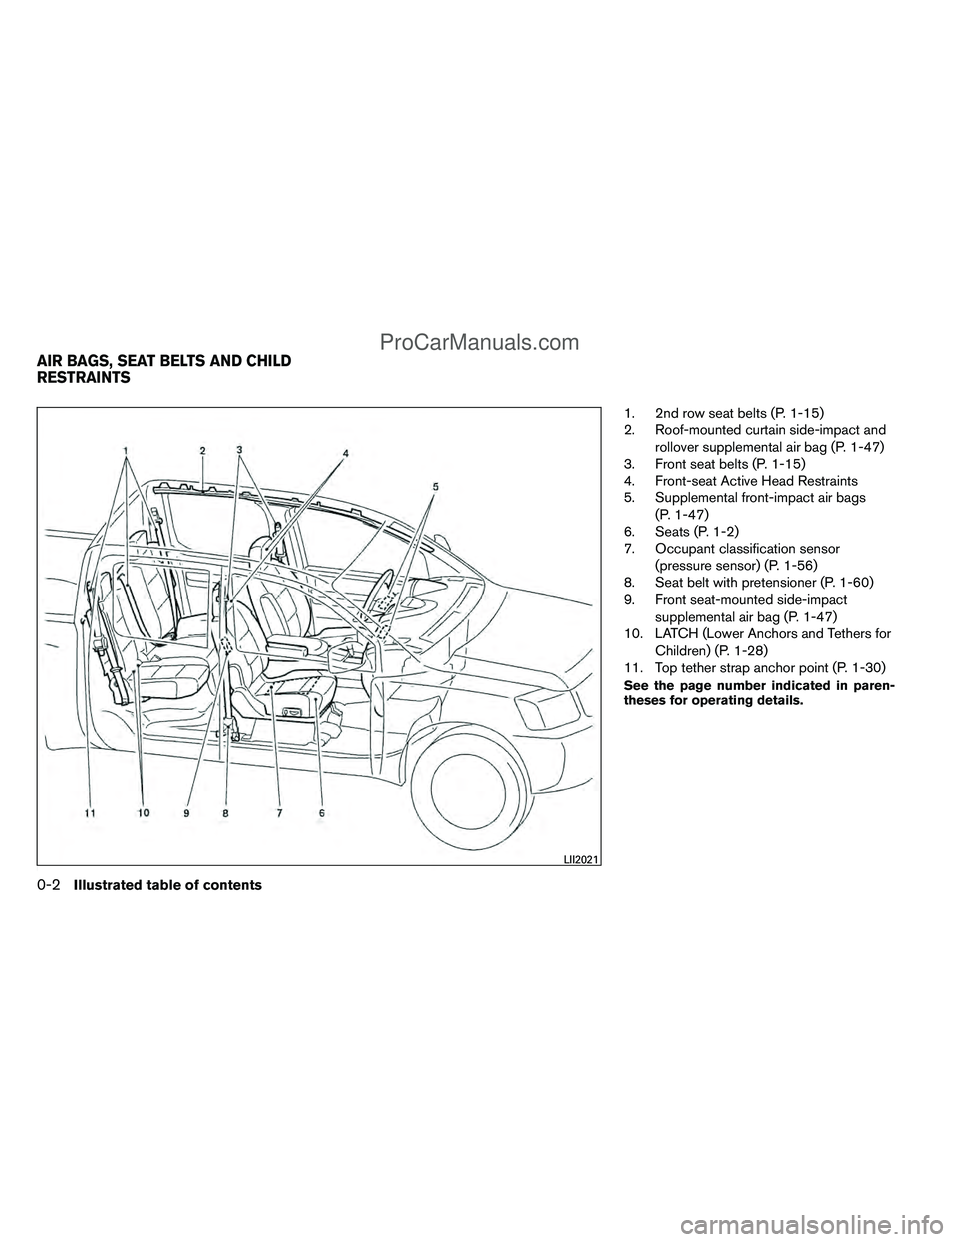 NISSAN TITAN 2012  Owners Manual 1. 2nd row seat belts (P. 1-15)
2. Roof-mounted curtain side-impact androllover supplemental air bag (P. 1-47)
3. Front seat belts (P. 1-15)
4. Front-seat Active Head Restraints
5. Supplemental front-